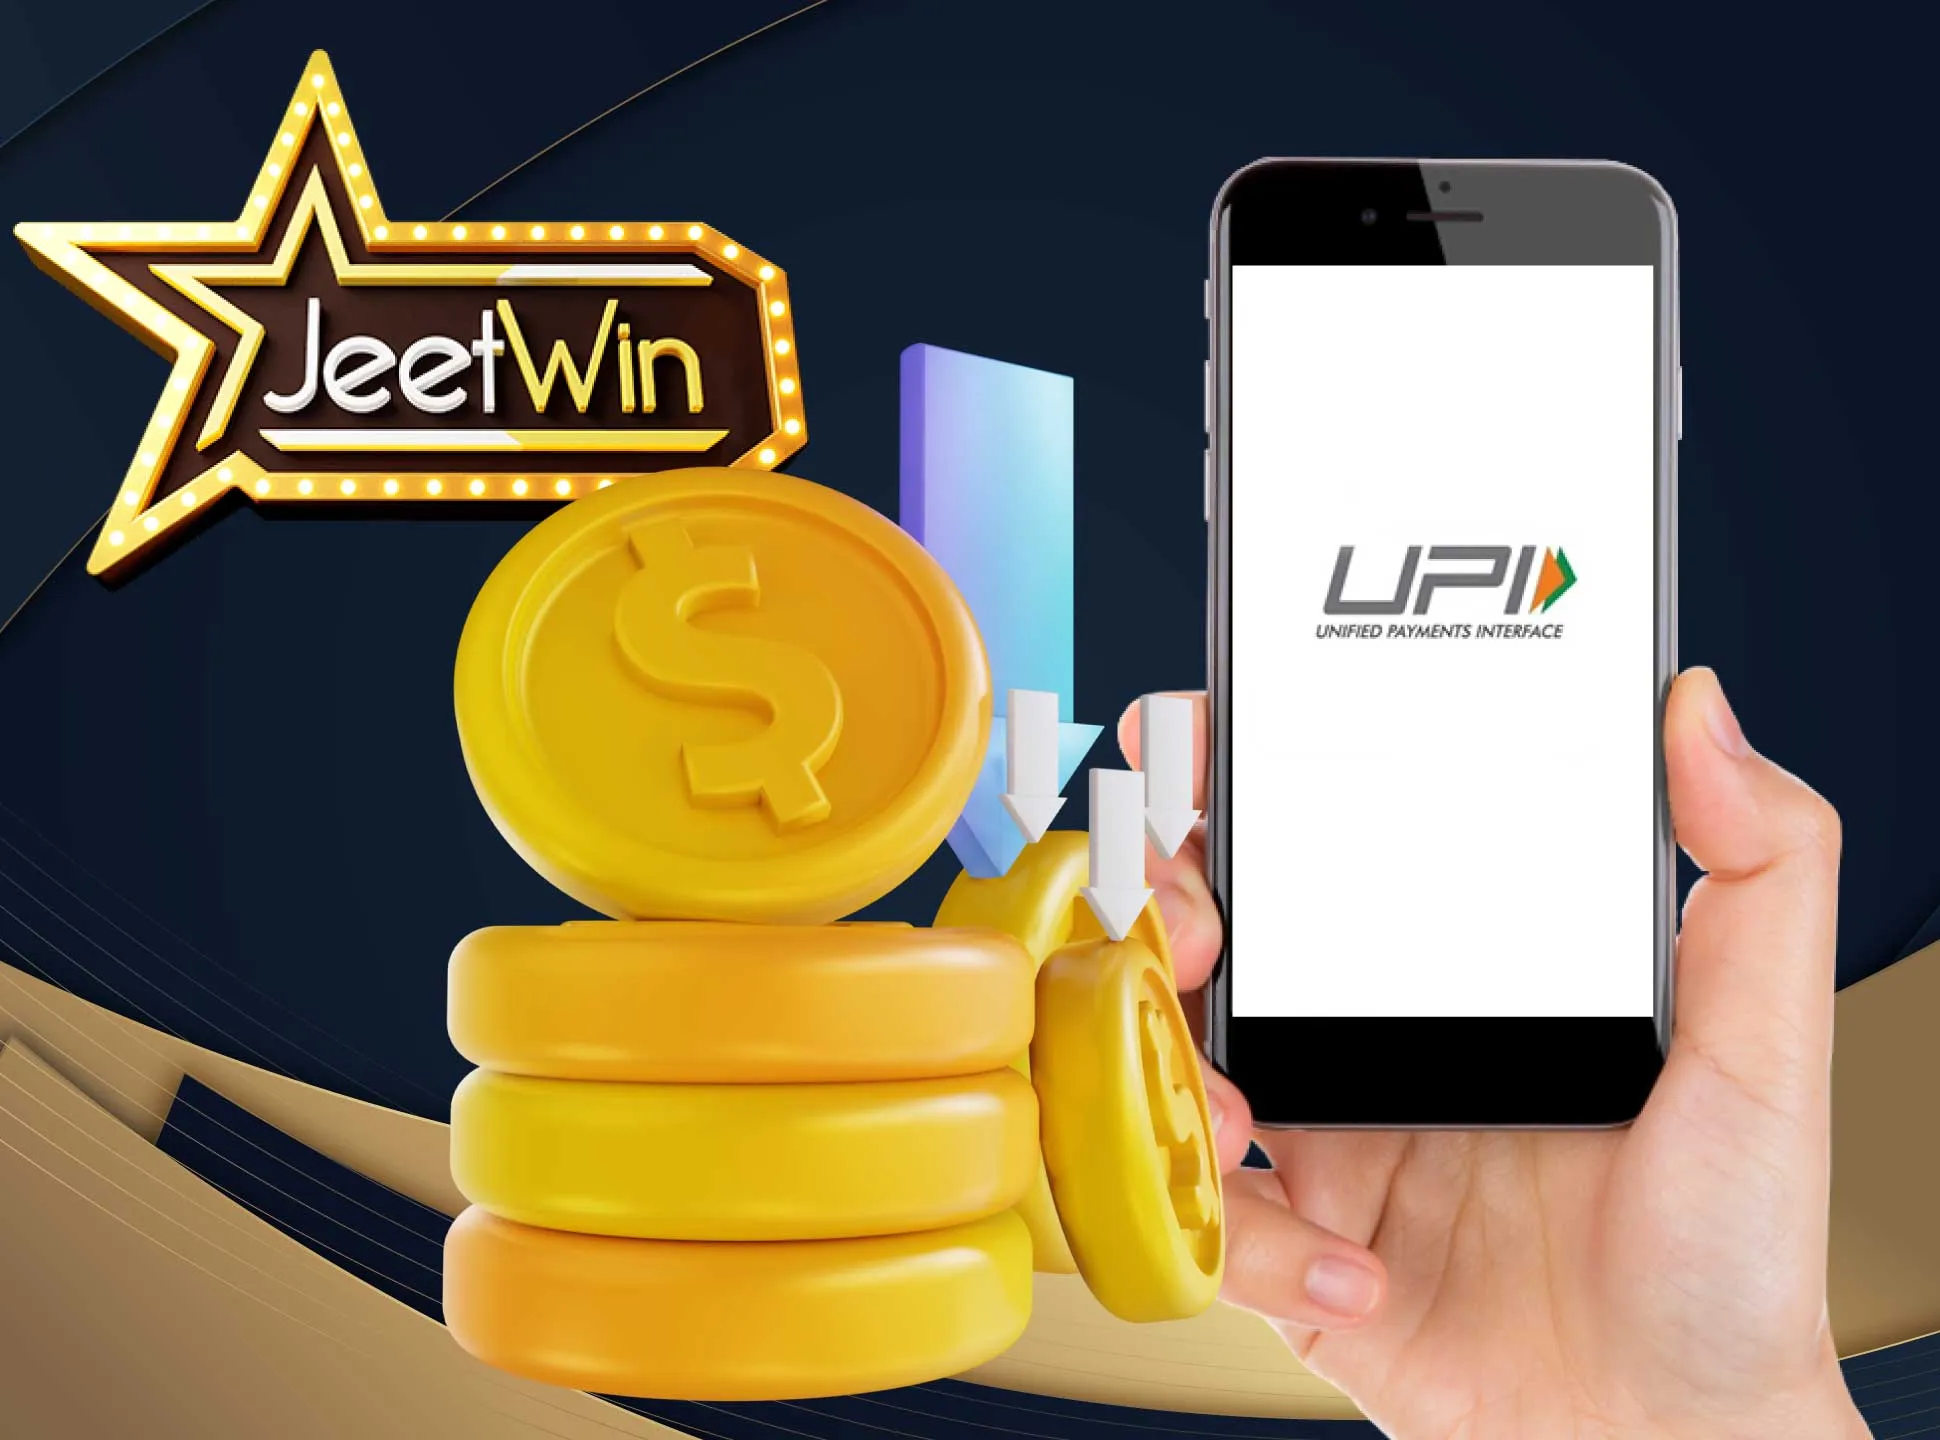 There are lots of different payments methods to top up the Jeetwin account.